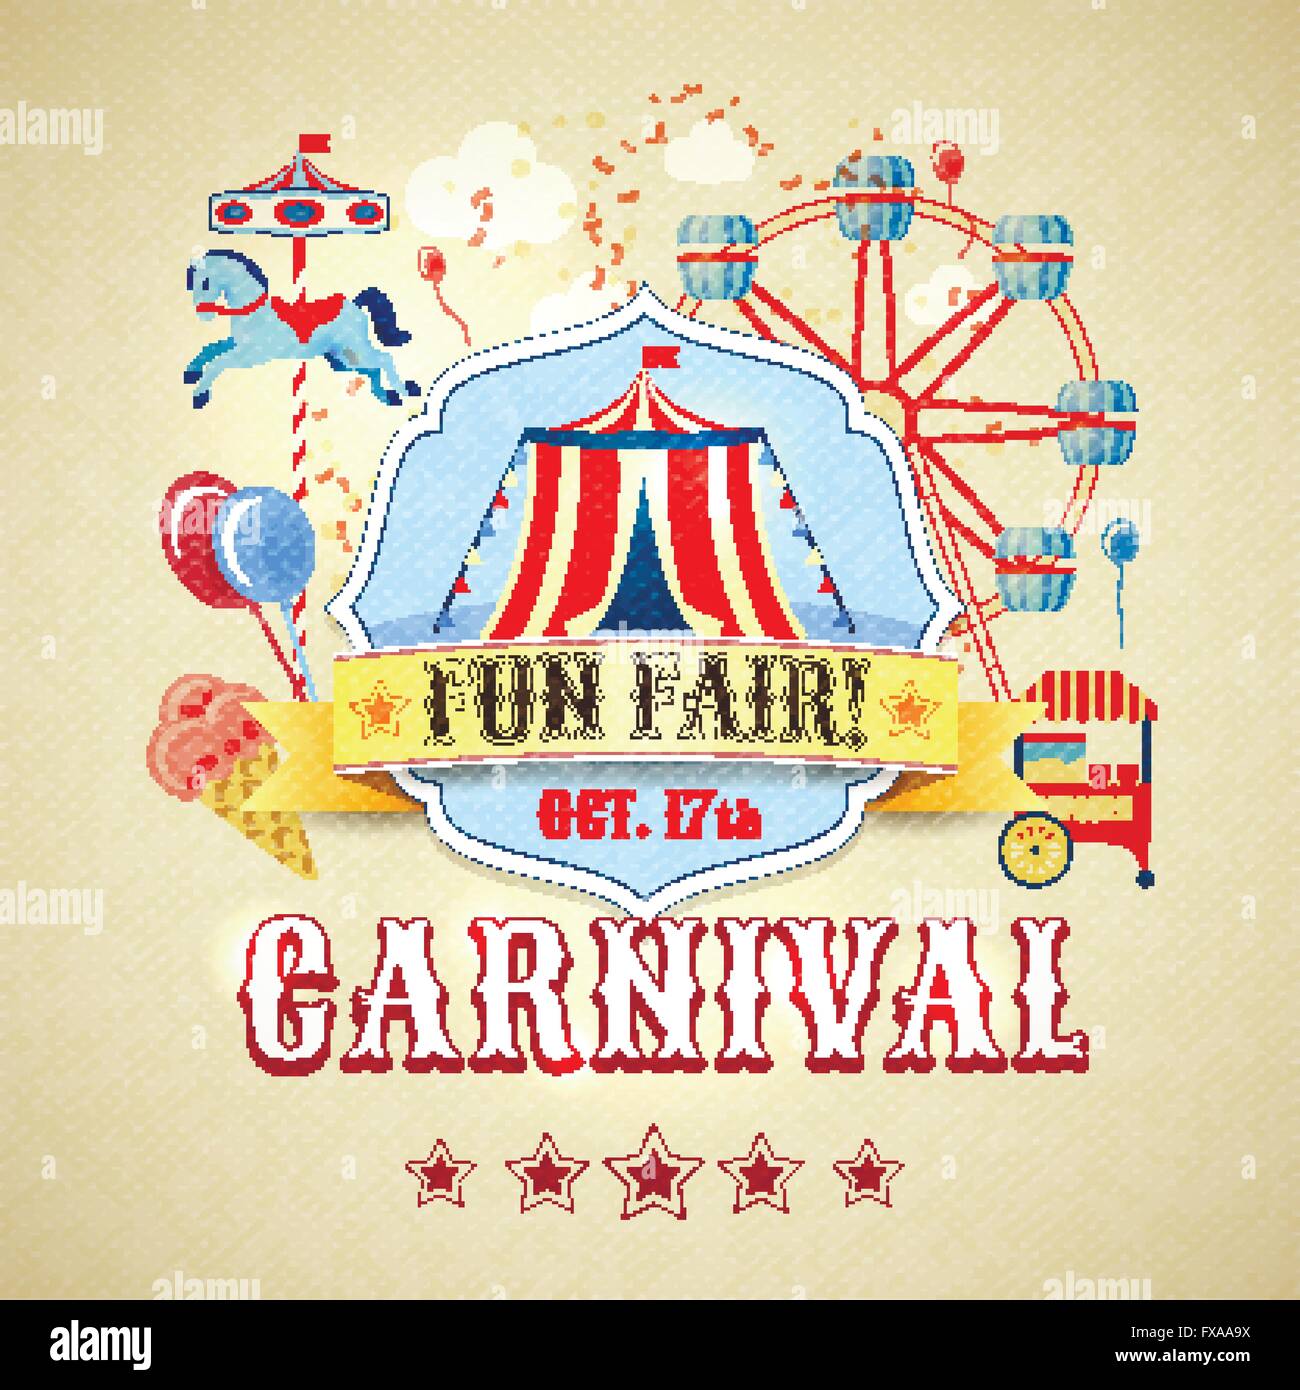 Vintage Circus Poster Template